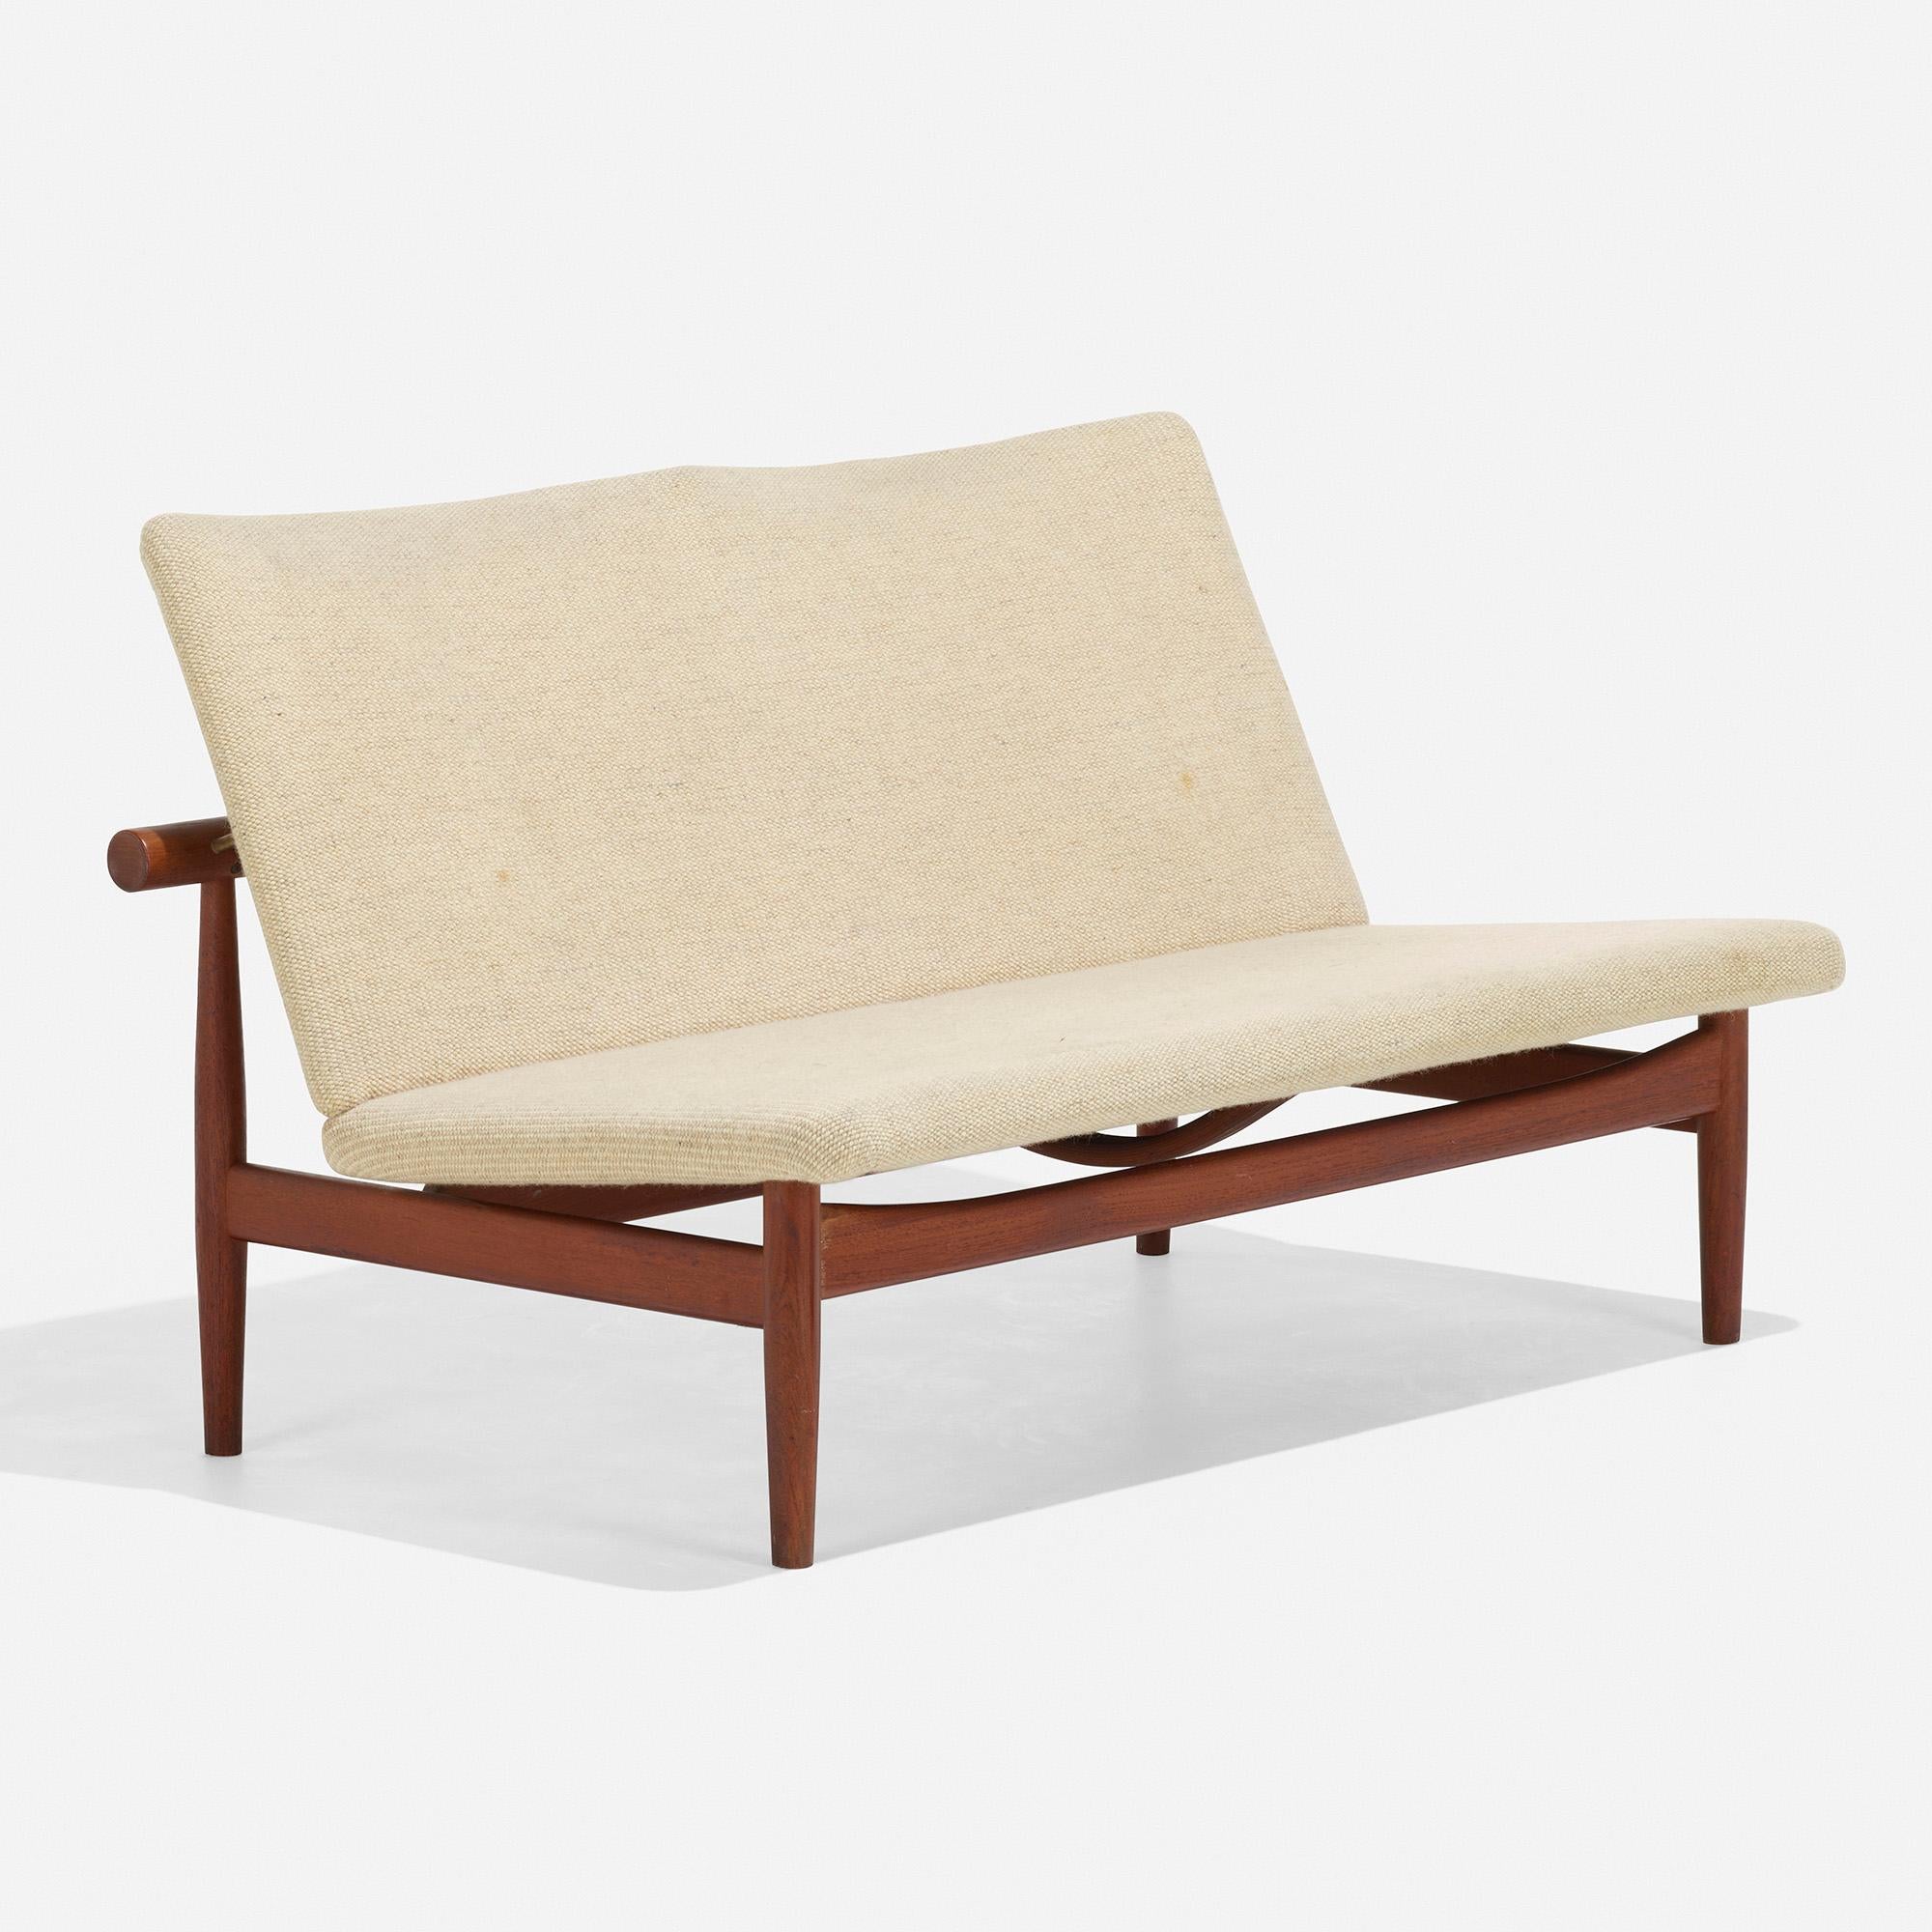 Made by: France & Søn, Denmark, 1953

Material: teak, upholstery, brass

Size: 50 w × 27.5 d × 28 h inches

Description: Metal manufacturer's label to back stretcher ‘Fd Charles France 6335539’. Metal distributor's label to back stretcher